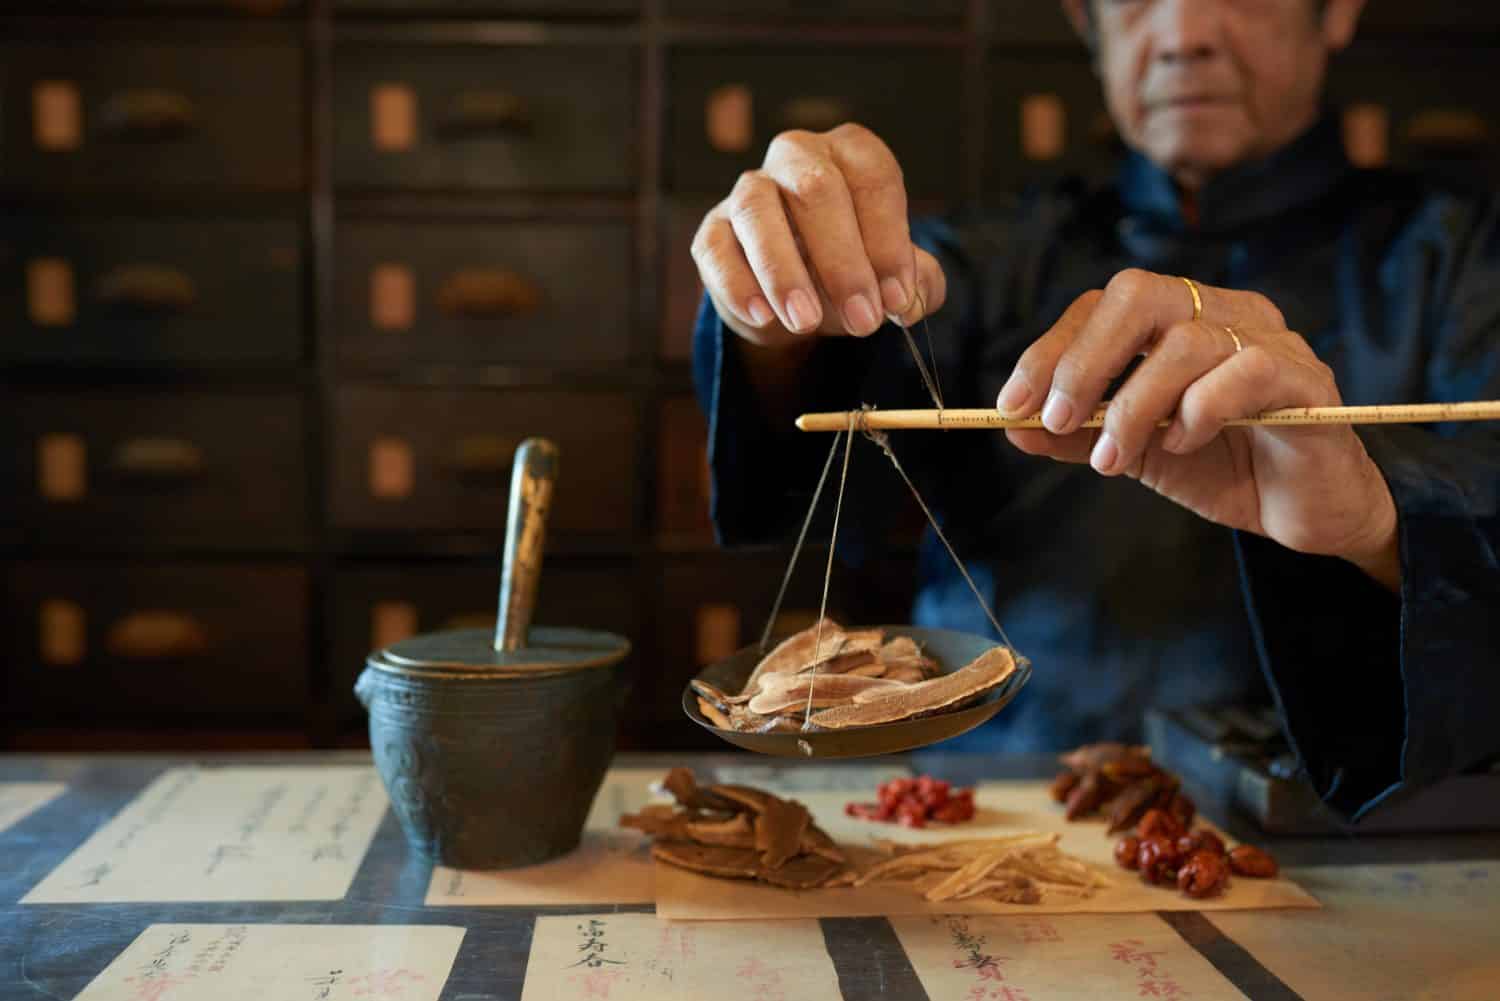 Man measuring ingredients in traditional Asian apothecary